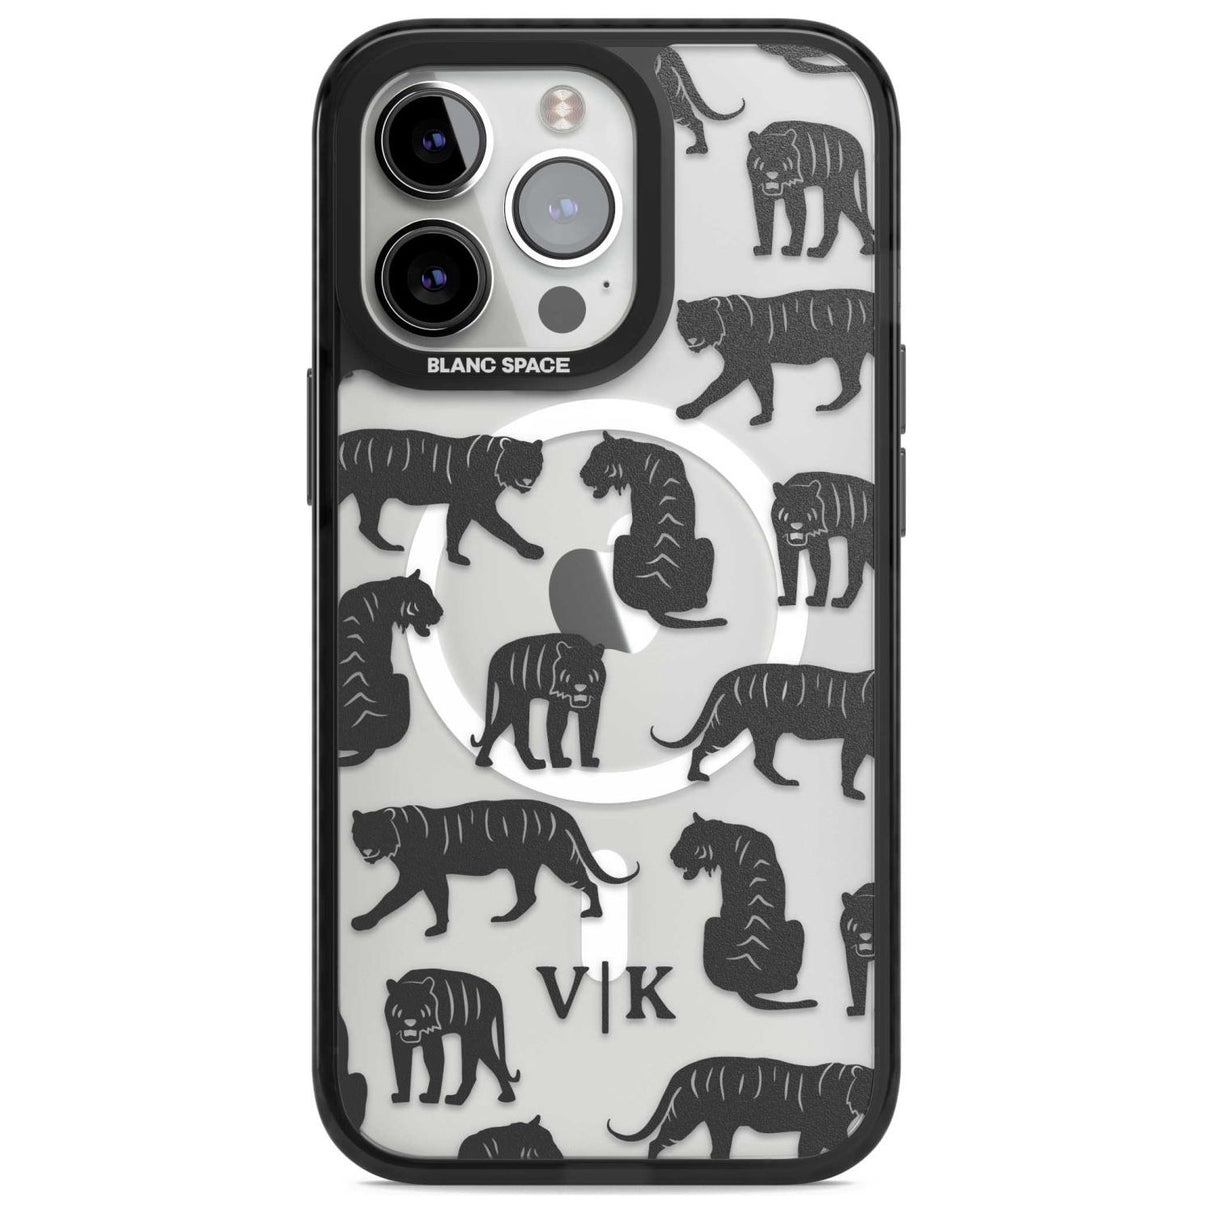 Personalised Tiger Silhouettes Custom Phone Case iPhone 15 Pro Max / Magsafe Black Impact Case,iPhone 15 Pro / Magsafe Black Impact Case,iPhone 14 Pro Max / Magsafe Black Impact Case,iPhone 14 Pro / Magsafe Black Impact Case,iPhone 13 Pro / Magsafe Black Impact Case Blanc Space